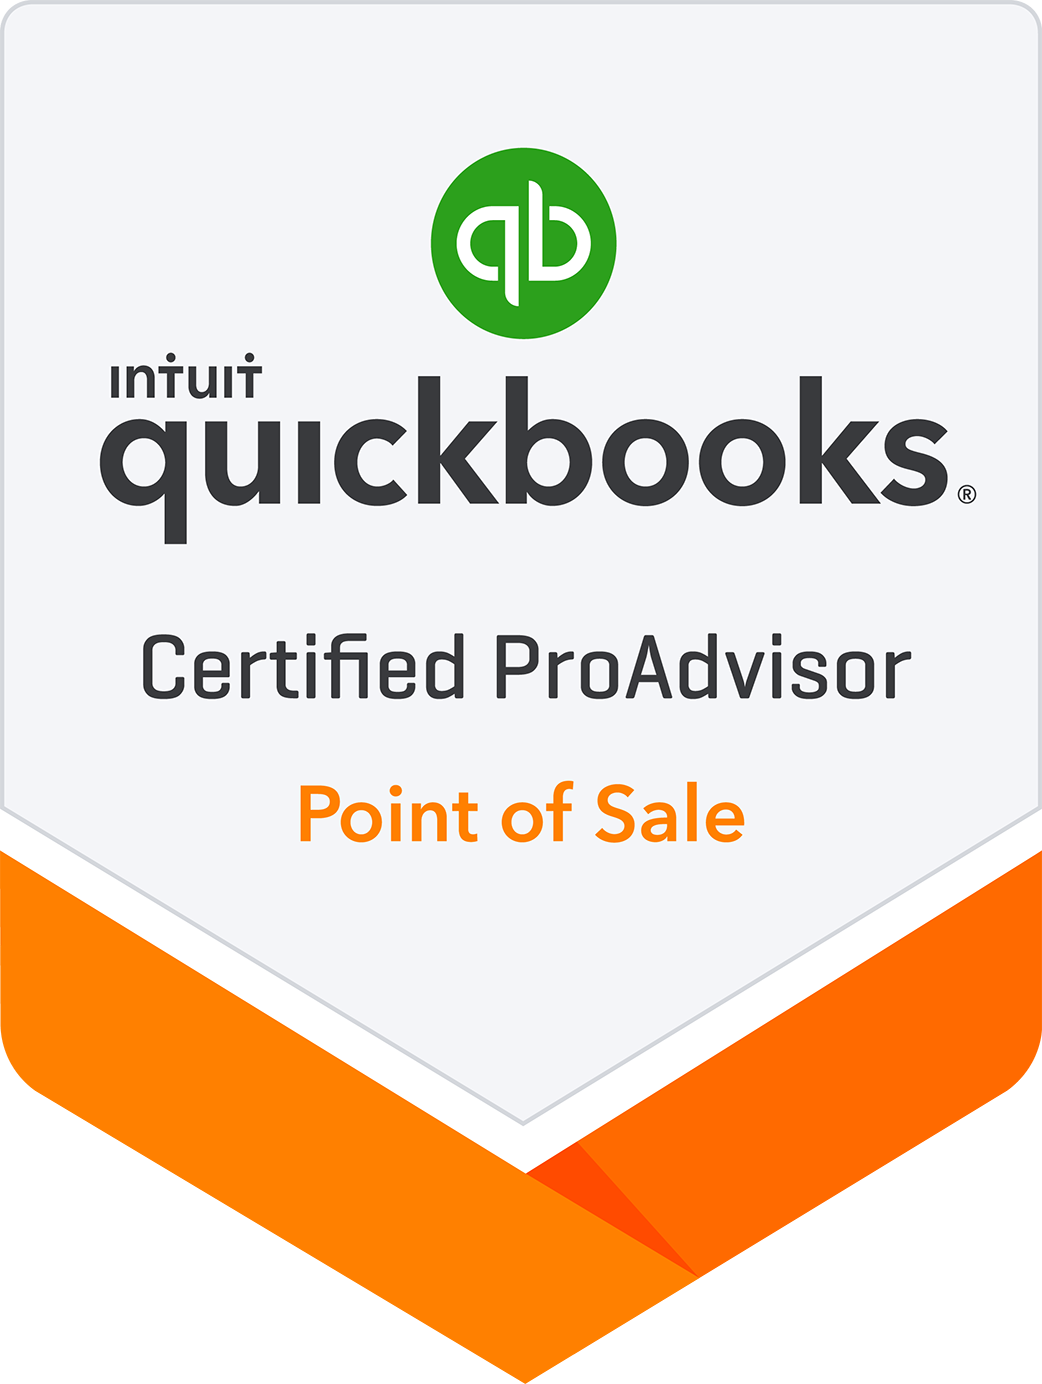 Certified in Intuit QuickBooks Point of Sale desktop versions  12.0, 10.0, 8.0, and 6.0 and someone who sells and services the product. No certification was offered for the versions in between or after such as 18.0.